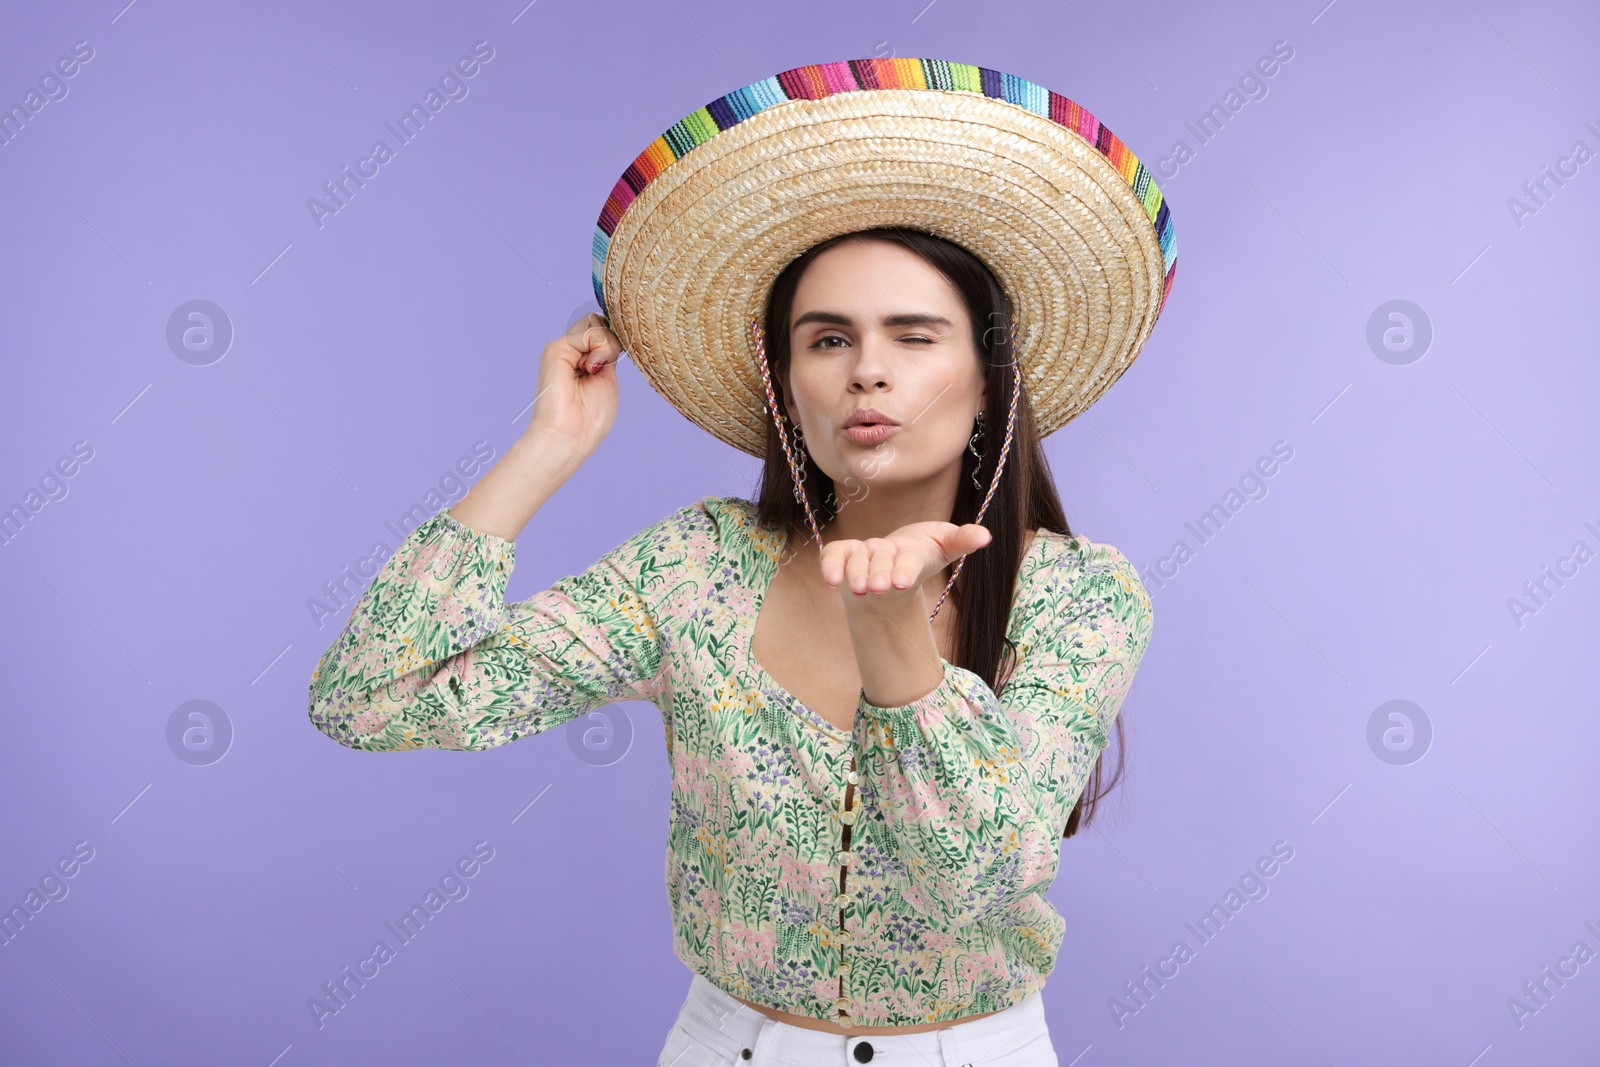 Photo of Young woman in Mexican sombrero hat blowing kiss on violet background